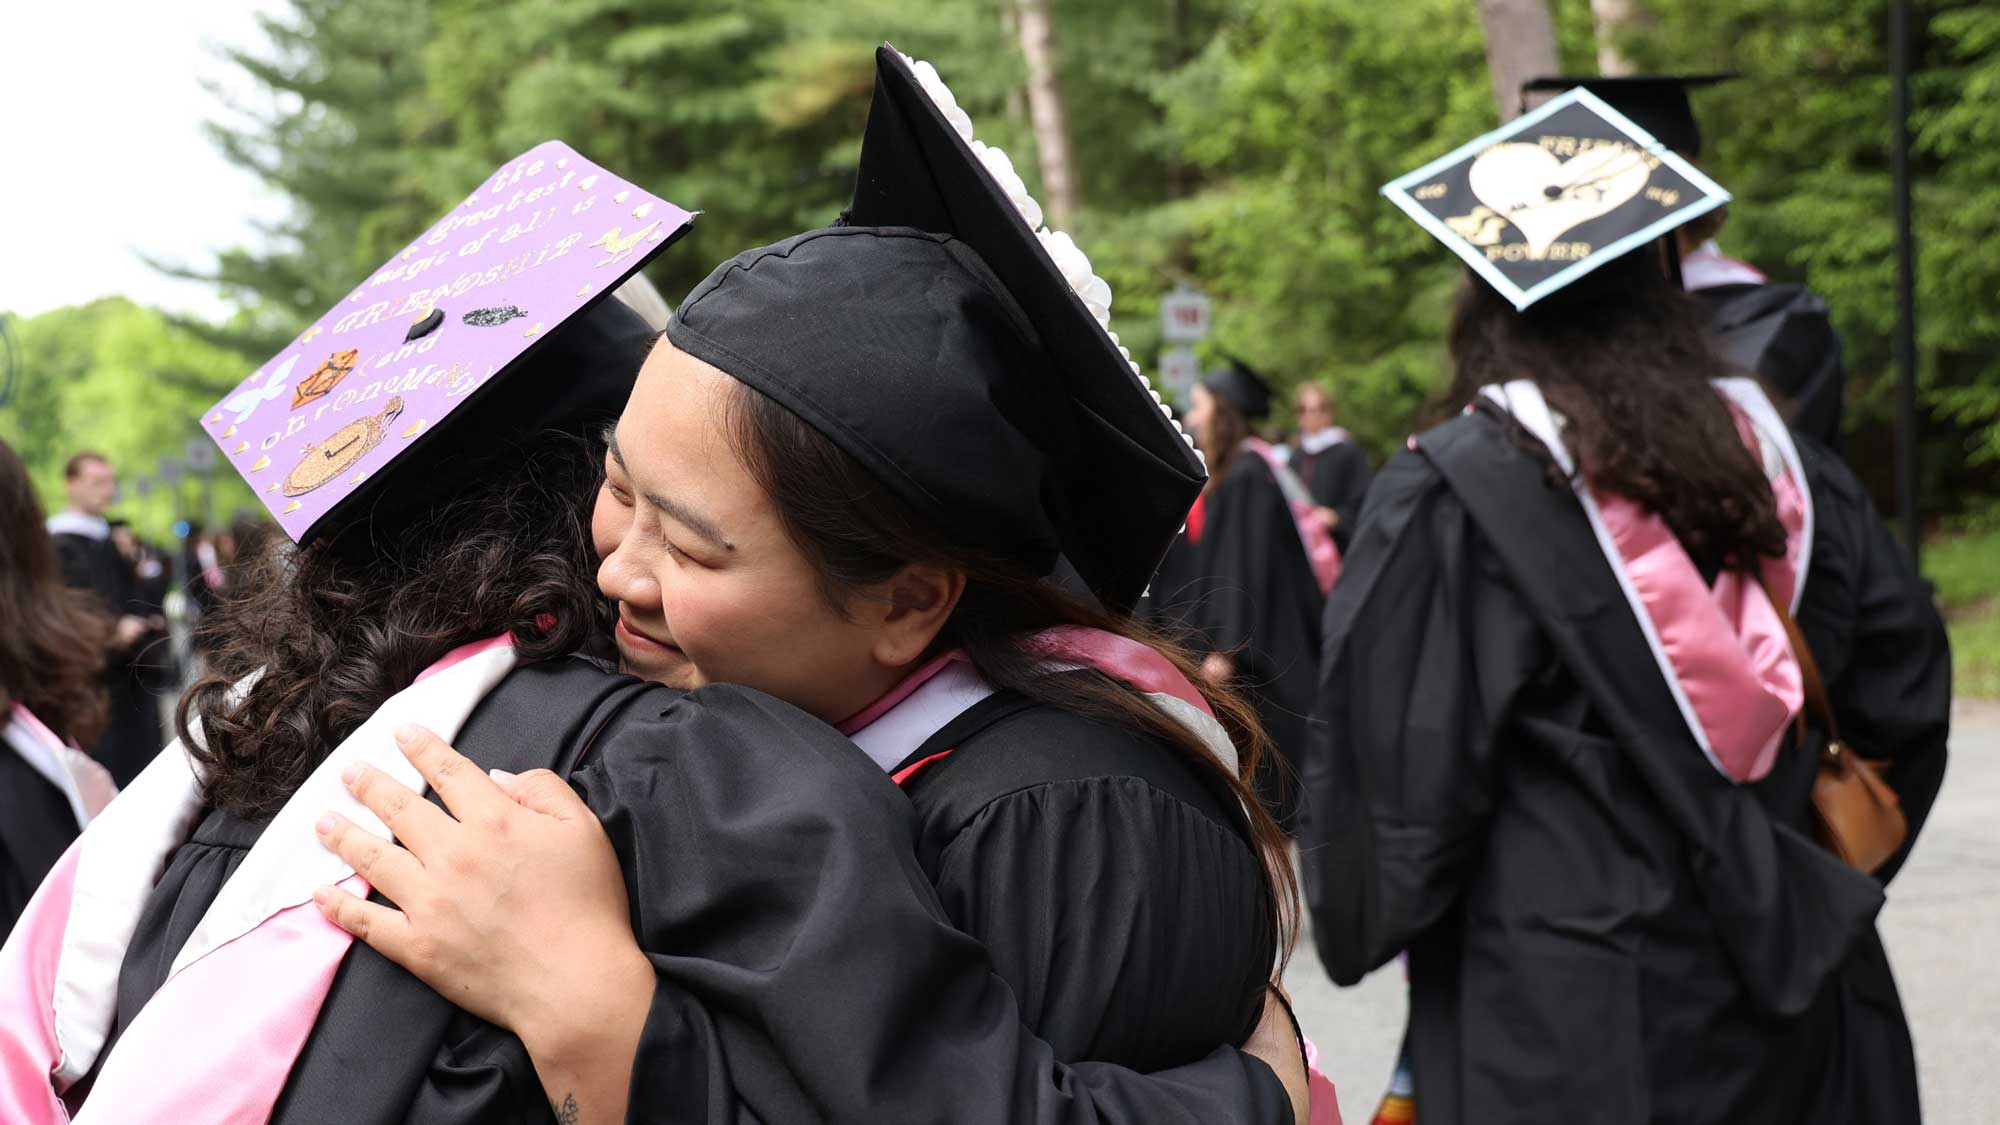 Two people in graduation ceremony attire embracing.